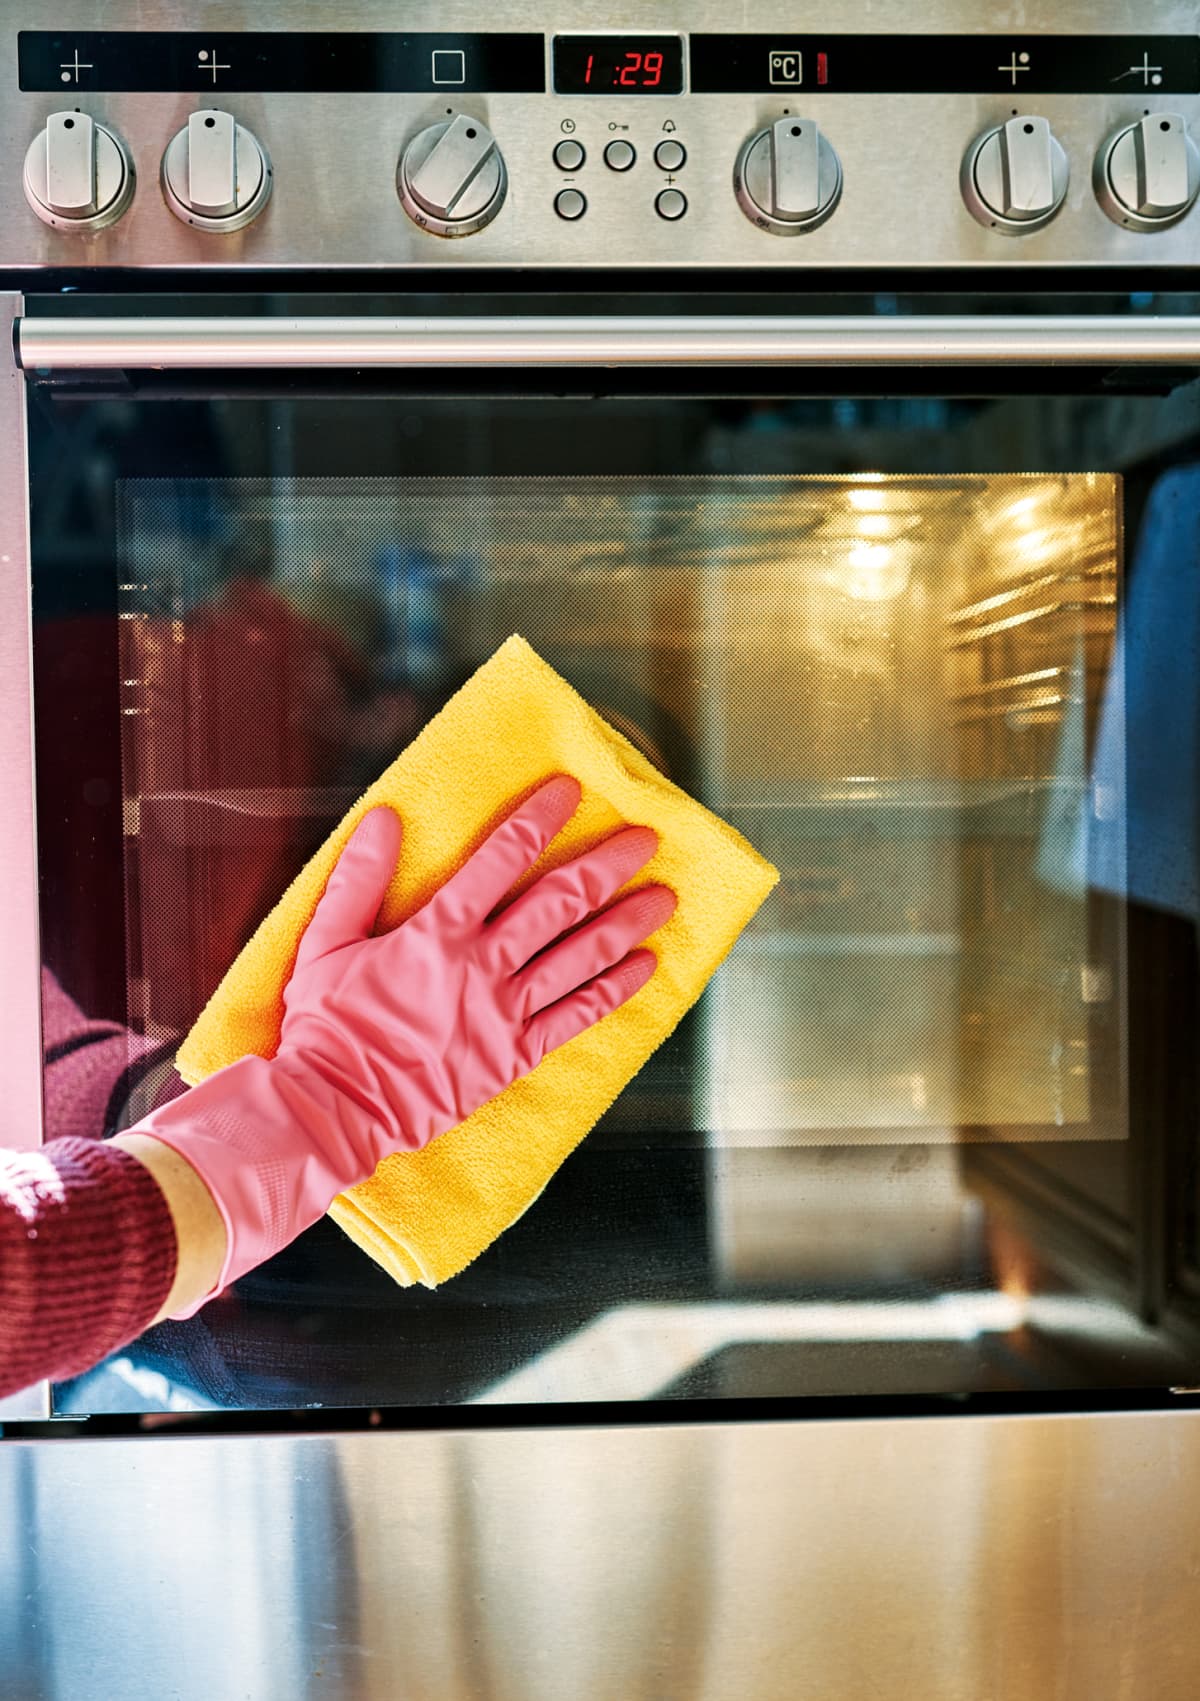 A gloved hand wiping an oven with a yellow rag.